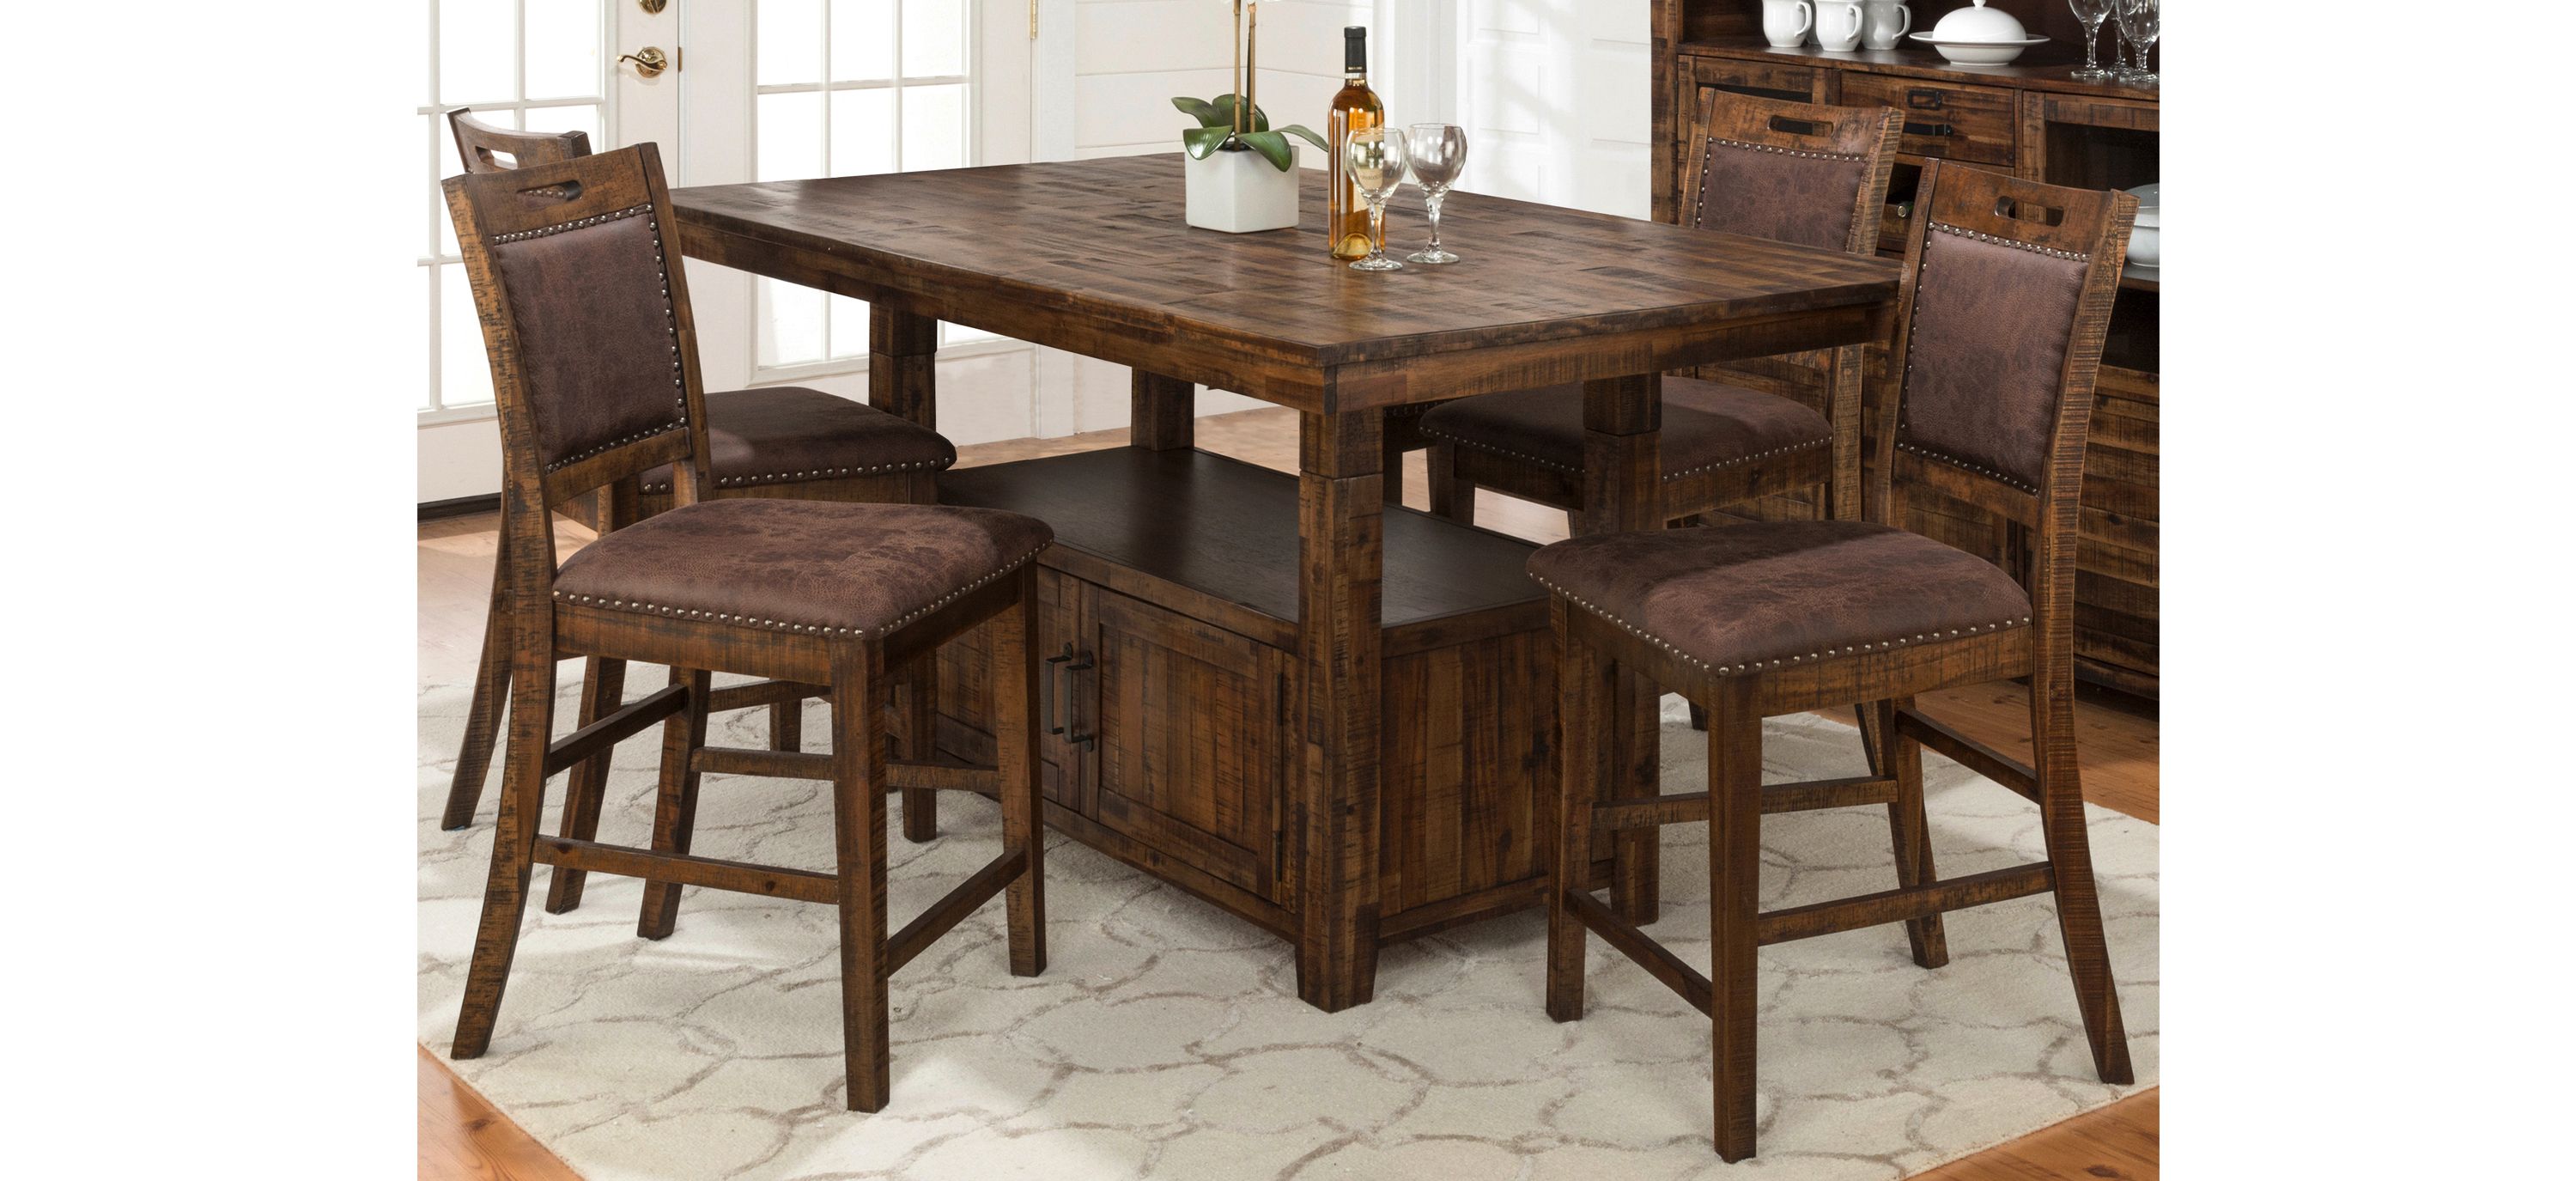 Cannon Valley 5-pc. Counter-Height Dining Set